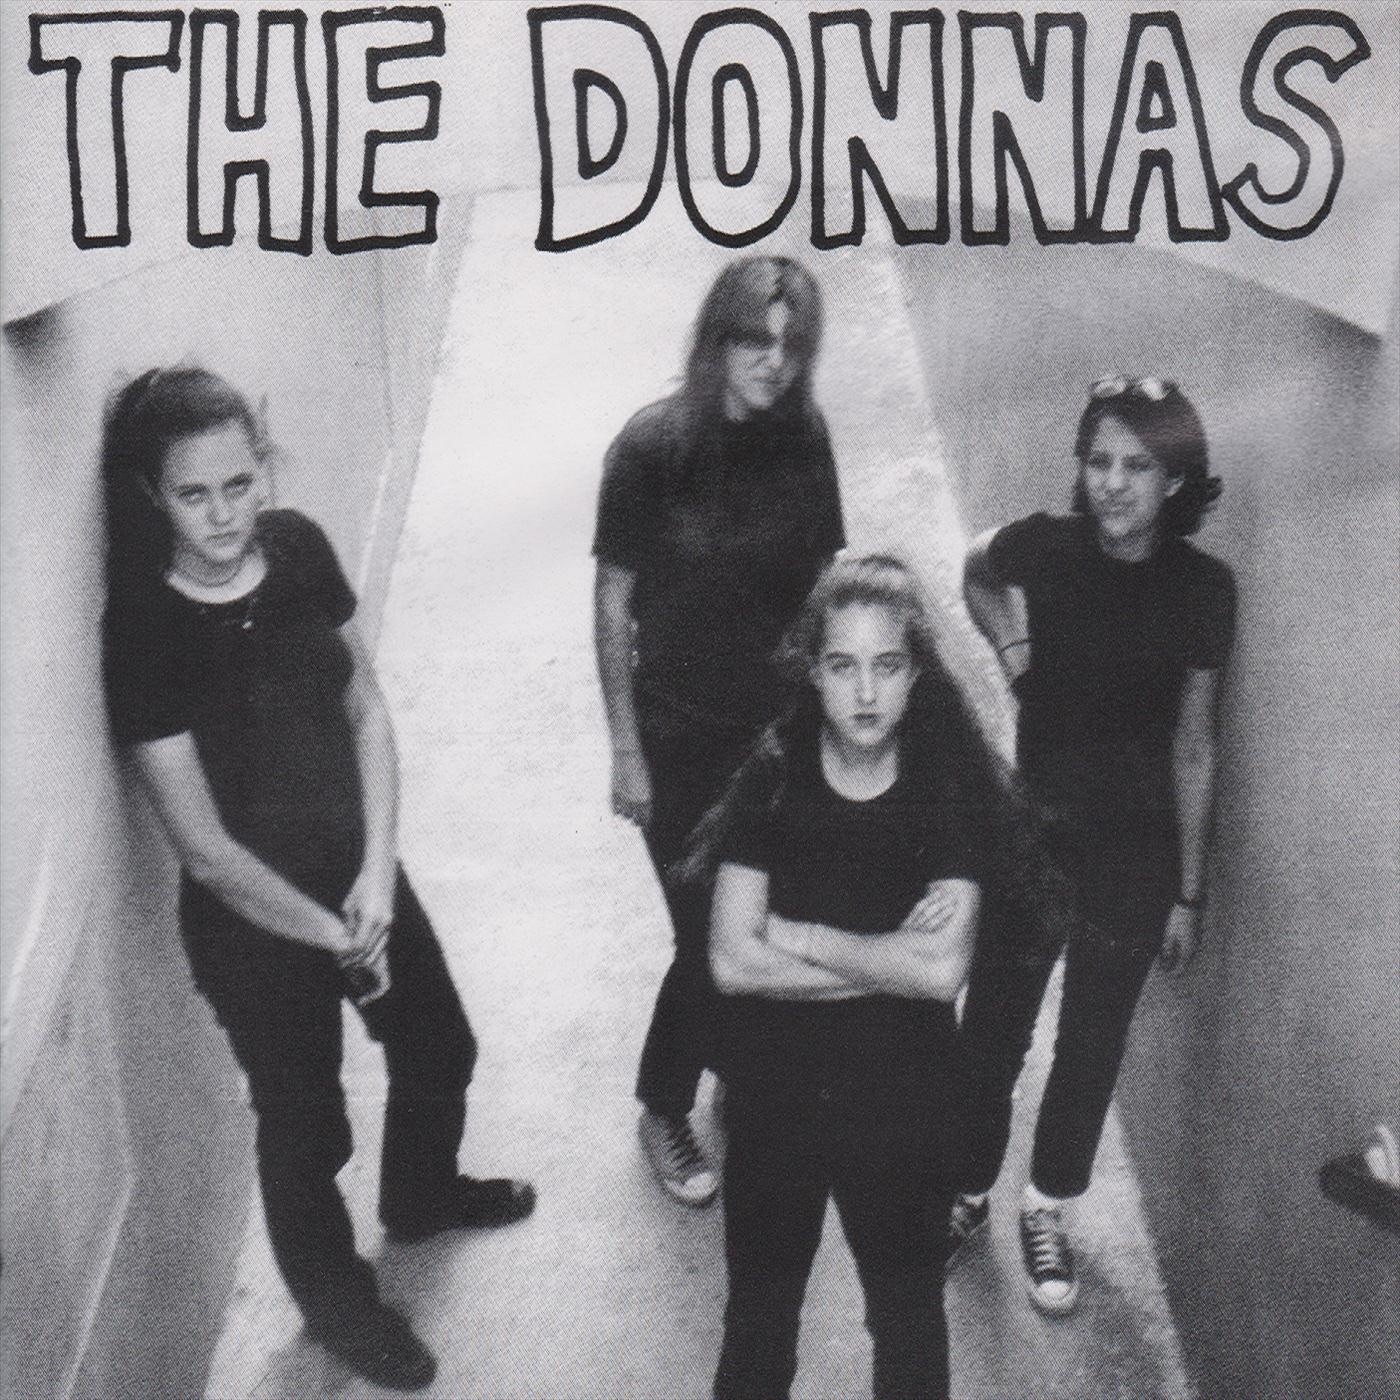 The Donnas by The Donnas